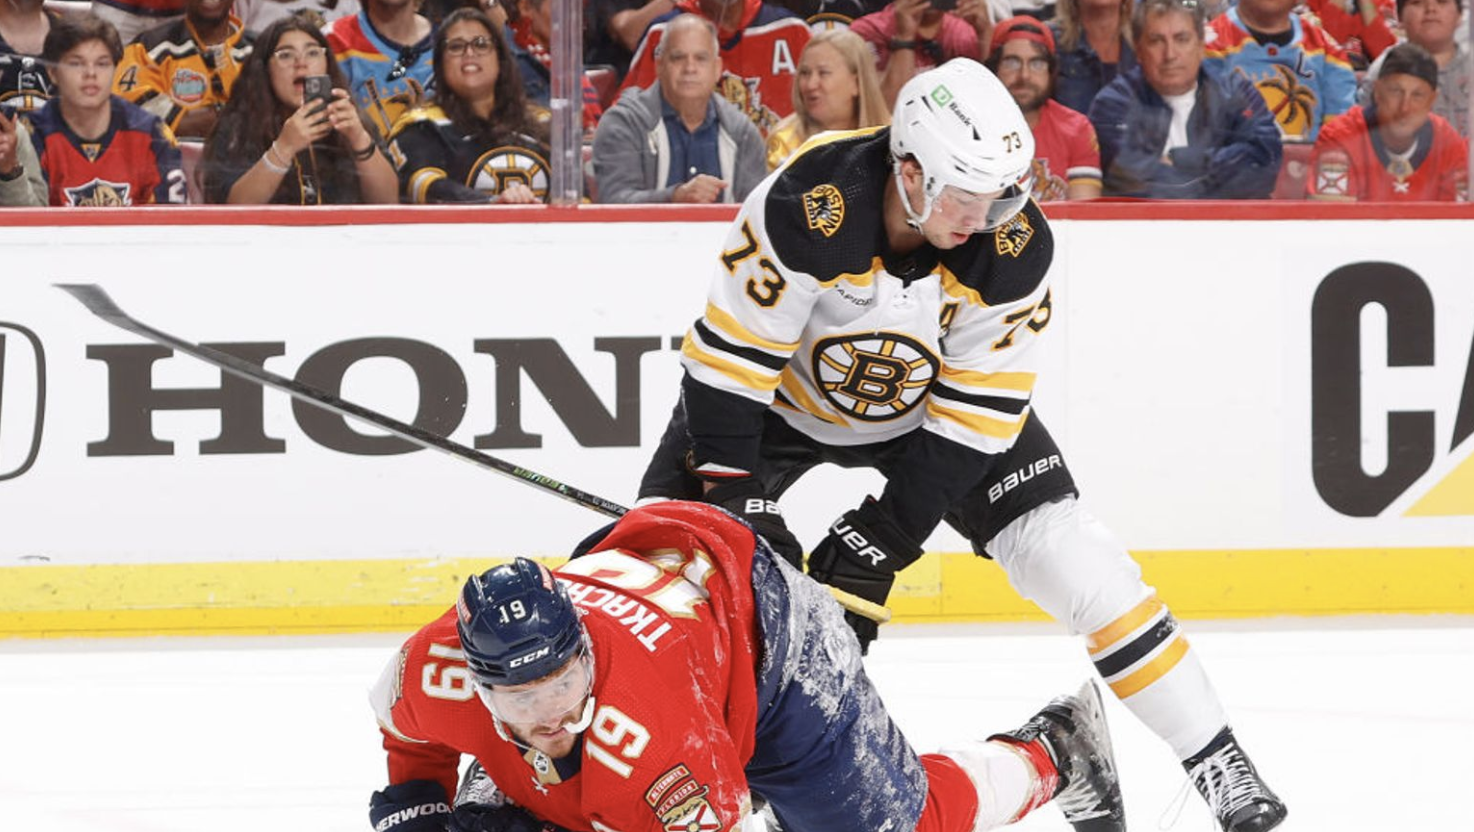 Bruins' David Krejci returns to lineup for Game 6 against Panthers